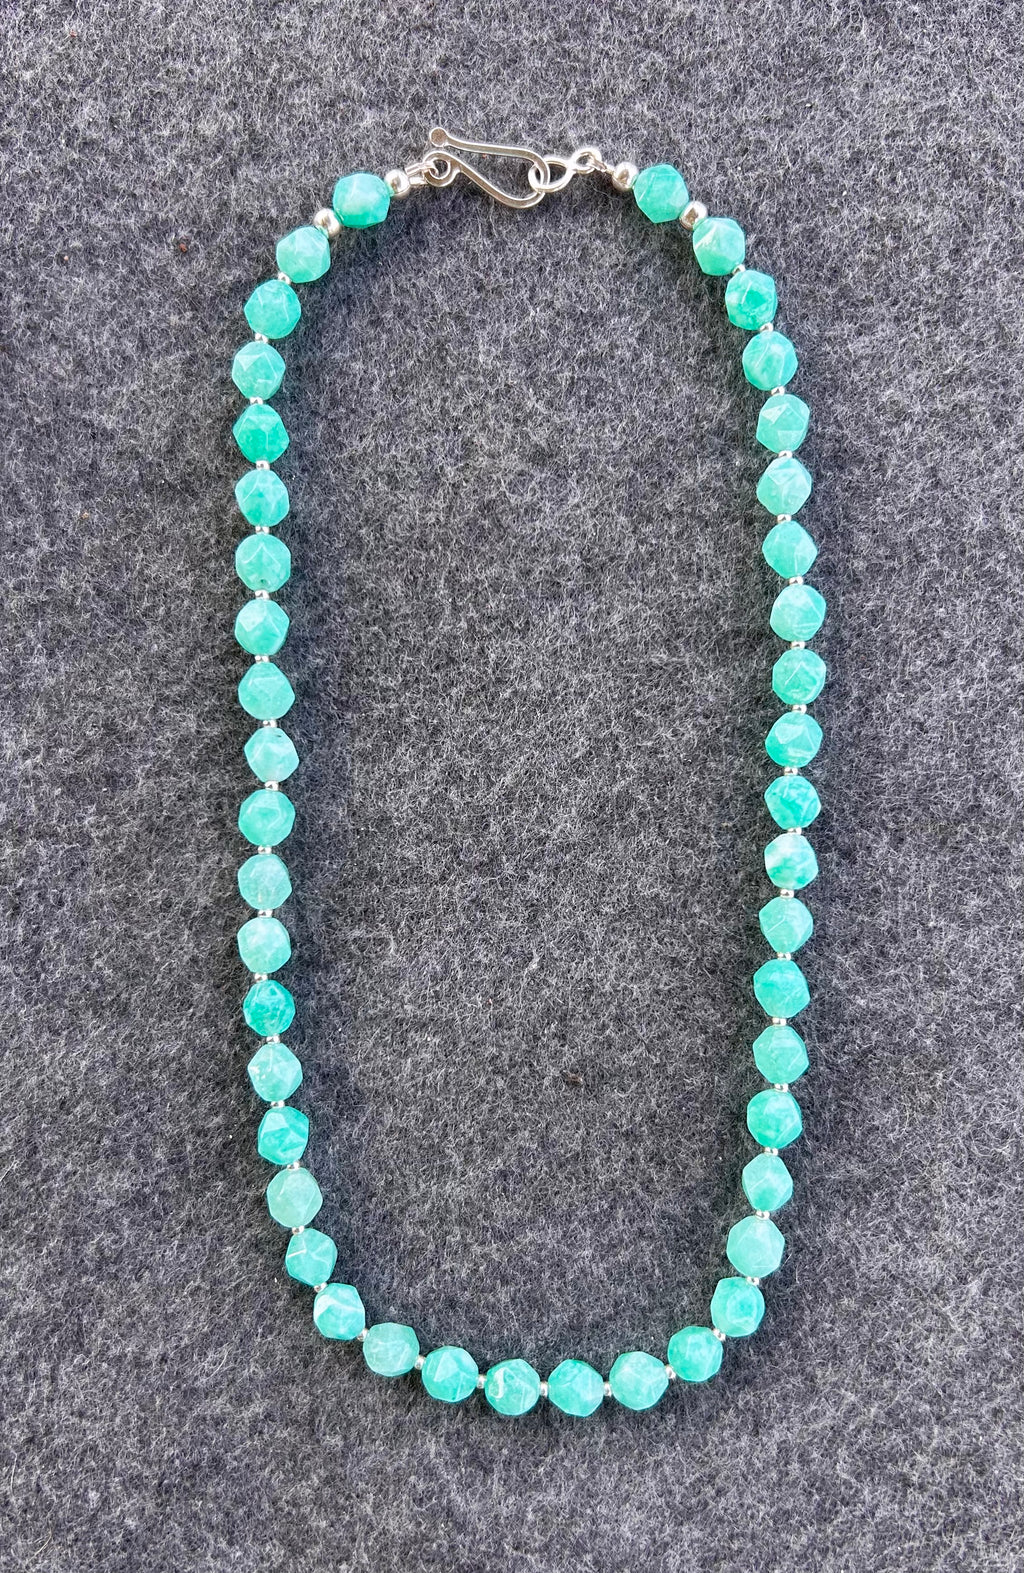 Amazonite Gemstone Layering Necklace with Sterling Silver